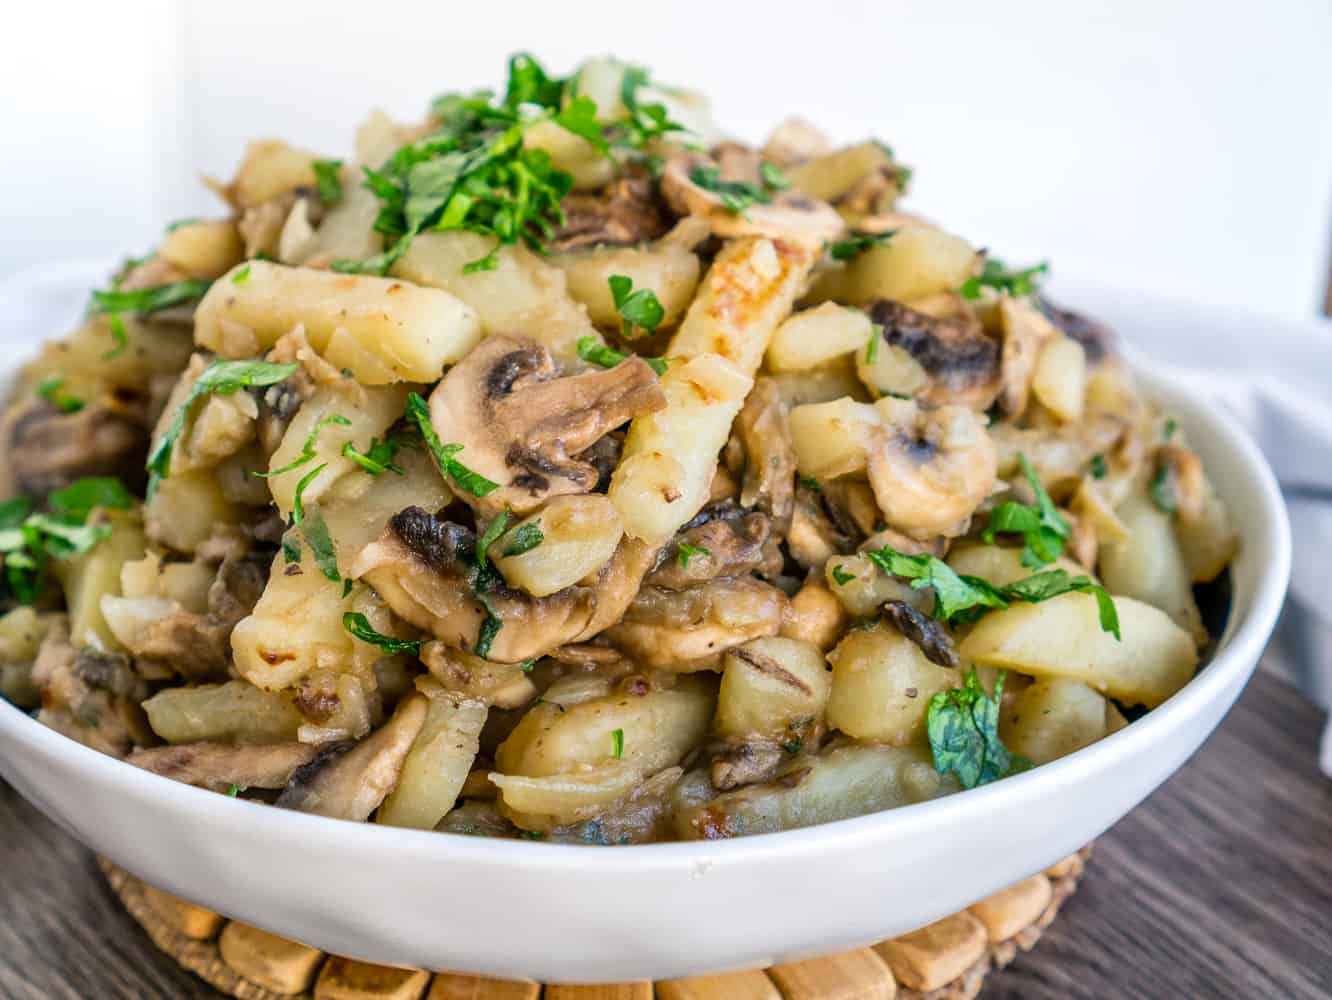 image of fried potatoes and mushrooms in a bowl